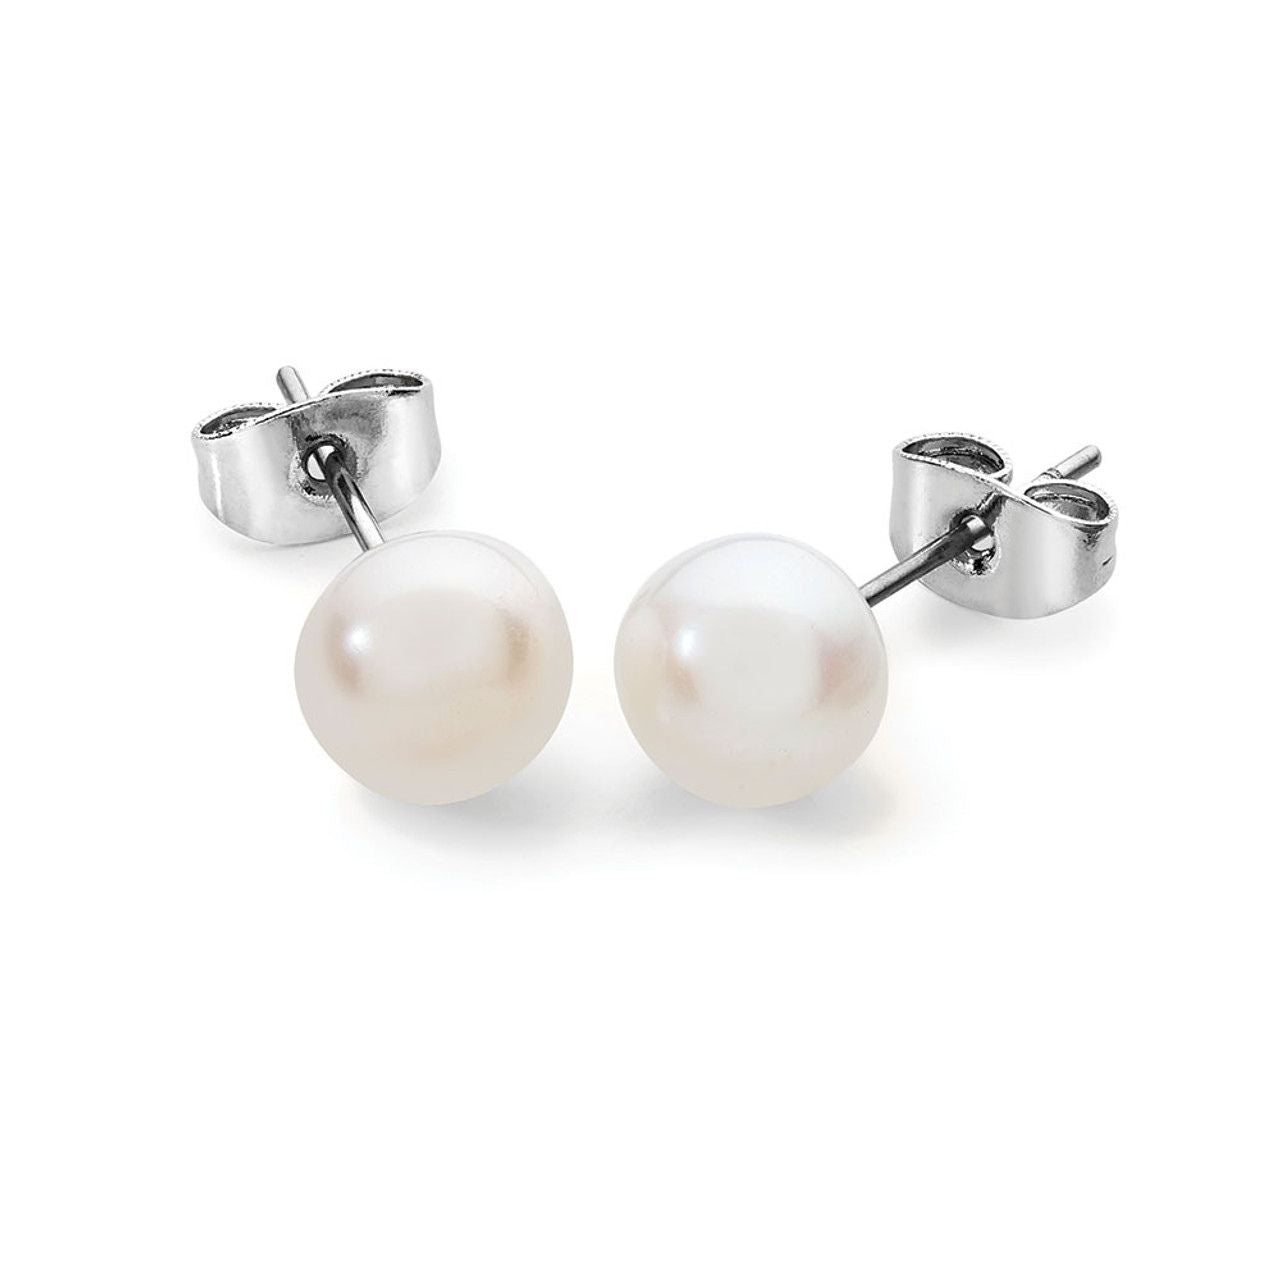 Tipperary Crystal Silver Medium Pearl Studs 8mm  These classic pearl stud earrings are a staple piece of jewellery in anyone’s jewellery box. Each shell pearl is cushioned in shape to give a more chic understated appearance, they can be worn casually or indeed worn with one of our more dramatic neckpieces to create an even more dramatic look.